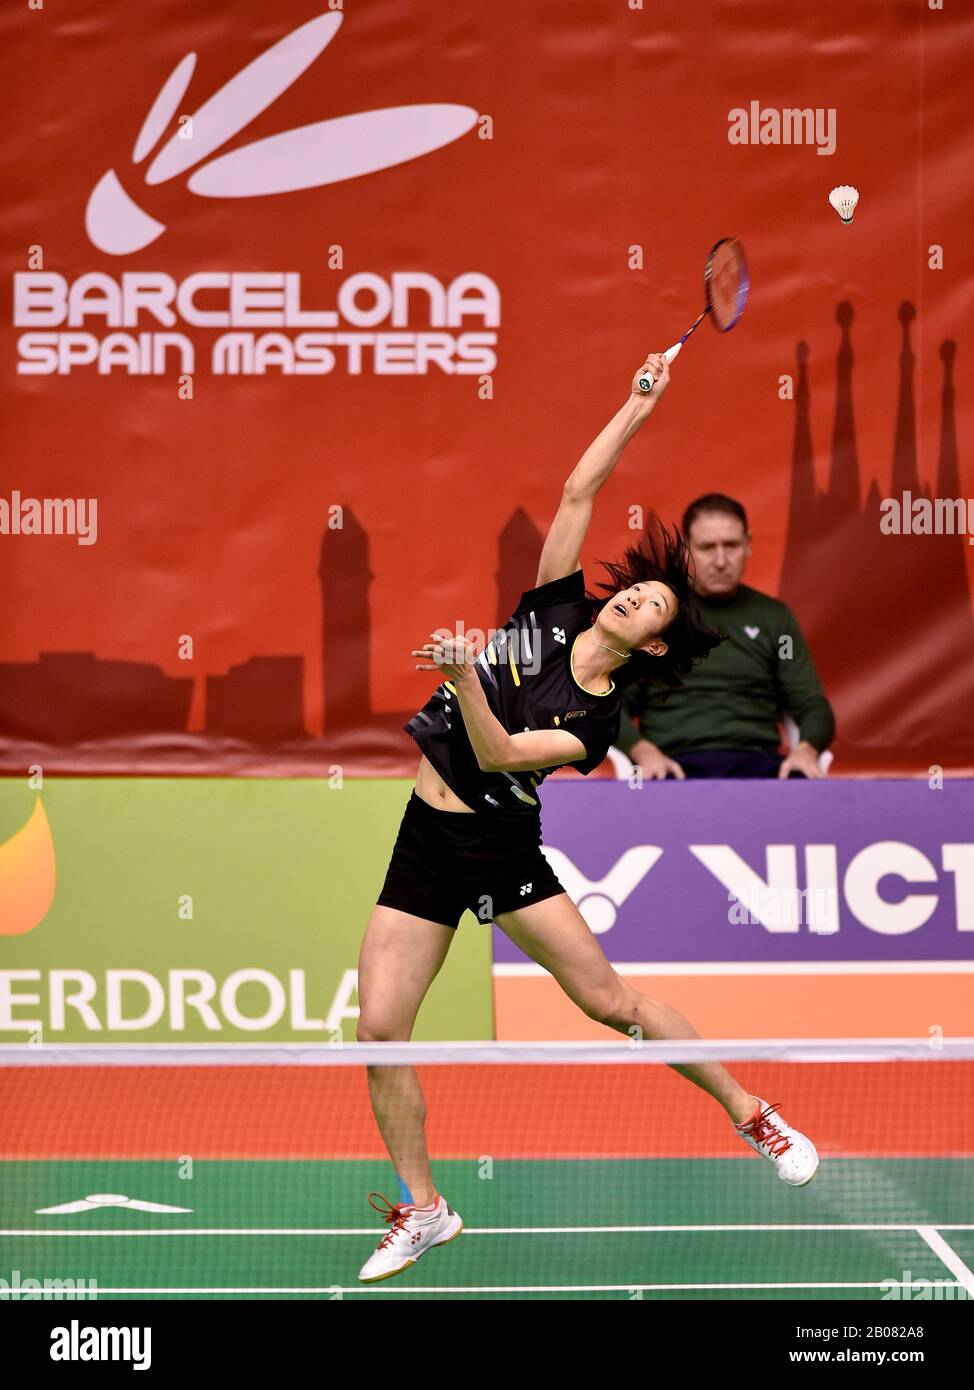 Barcelona, Spain. 19th Feb 2020. Barcelona Spain Master 2020 - Day 2; Saina  Nehwal of India competes in the Women's Single qualification Round 1 match  against Yvonne Li of Germany on day